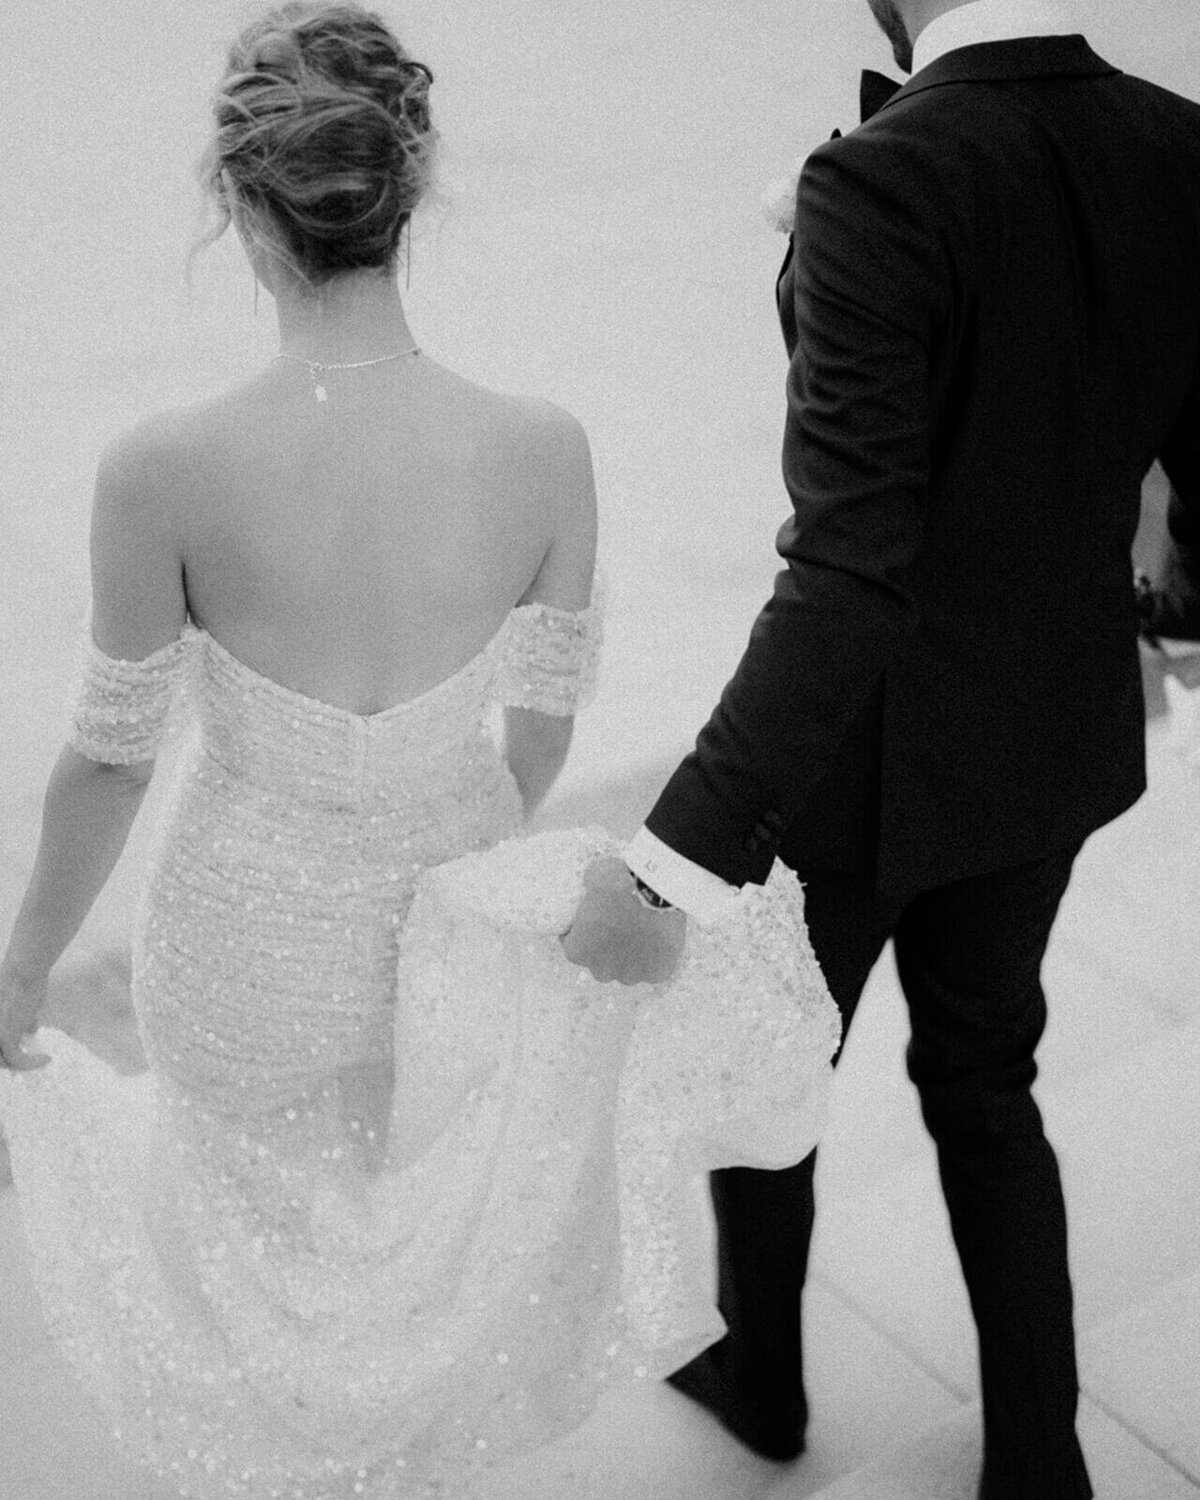 Groom holding the back of the brides dress while walking